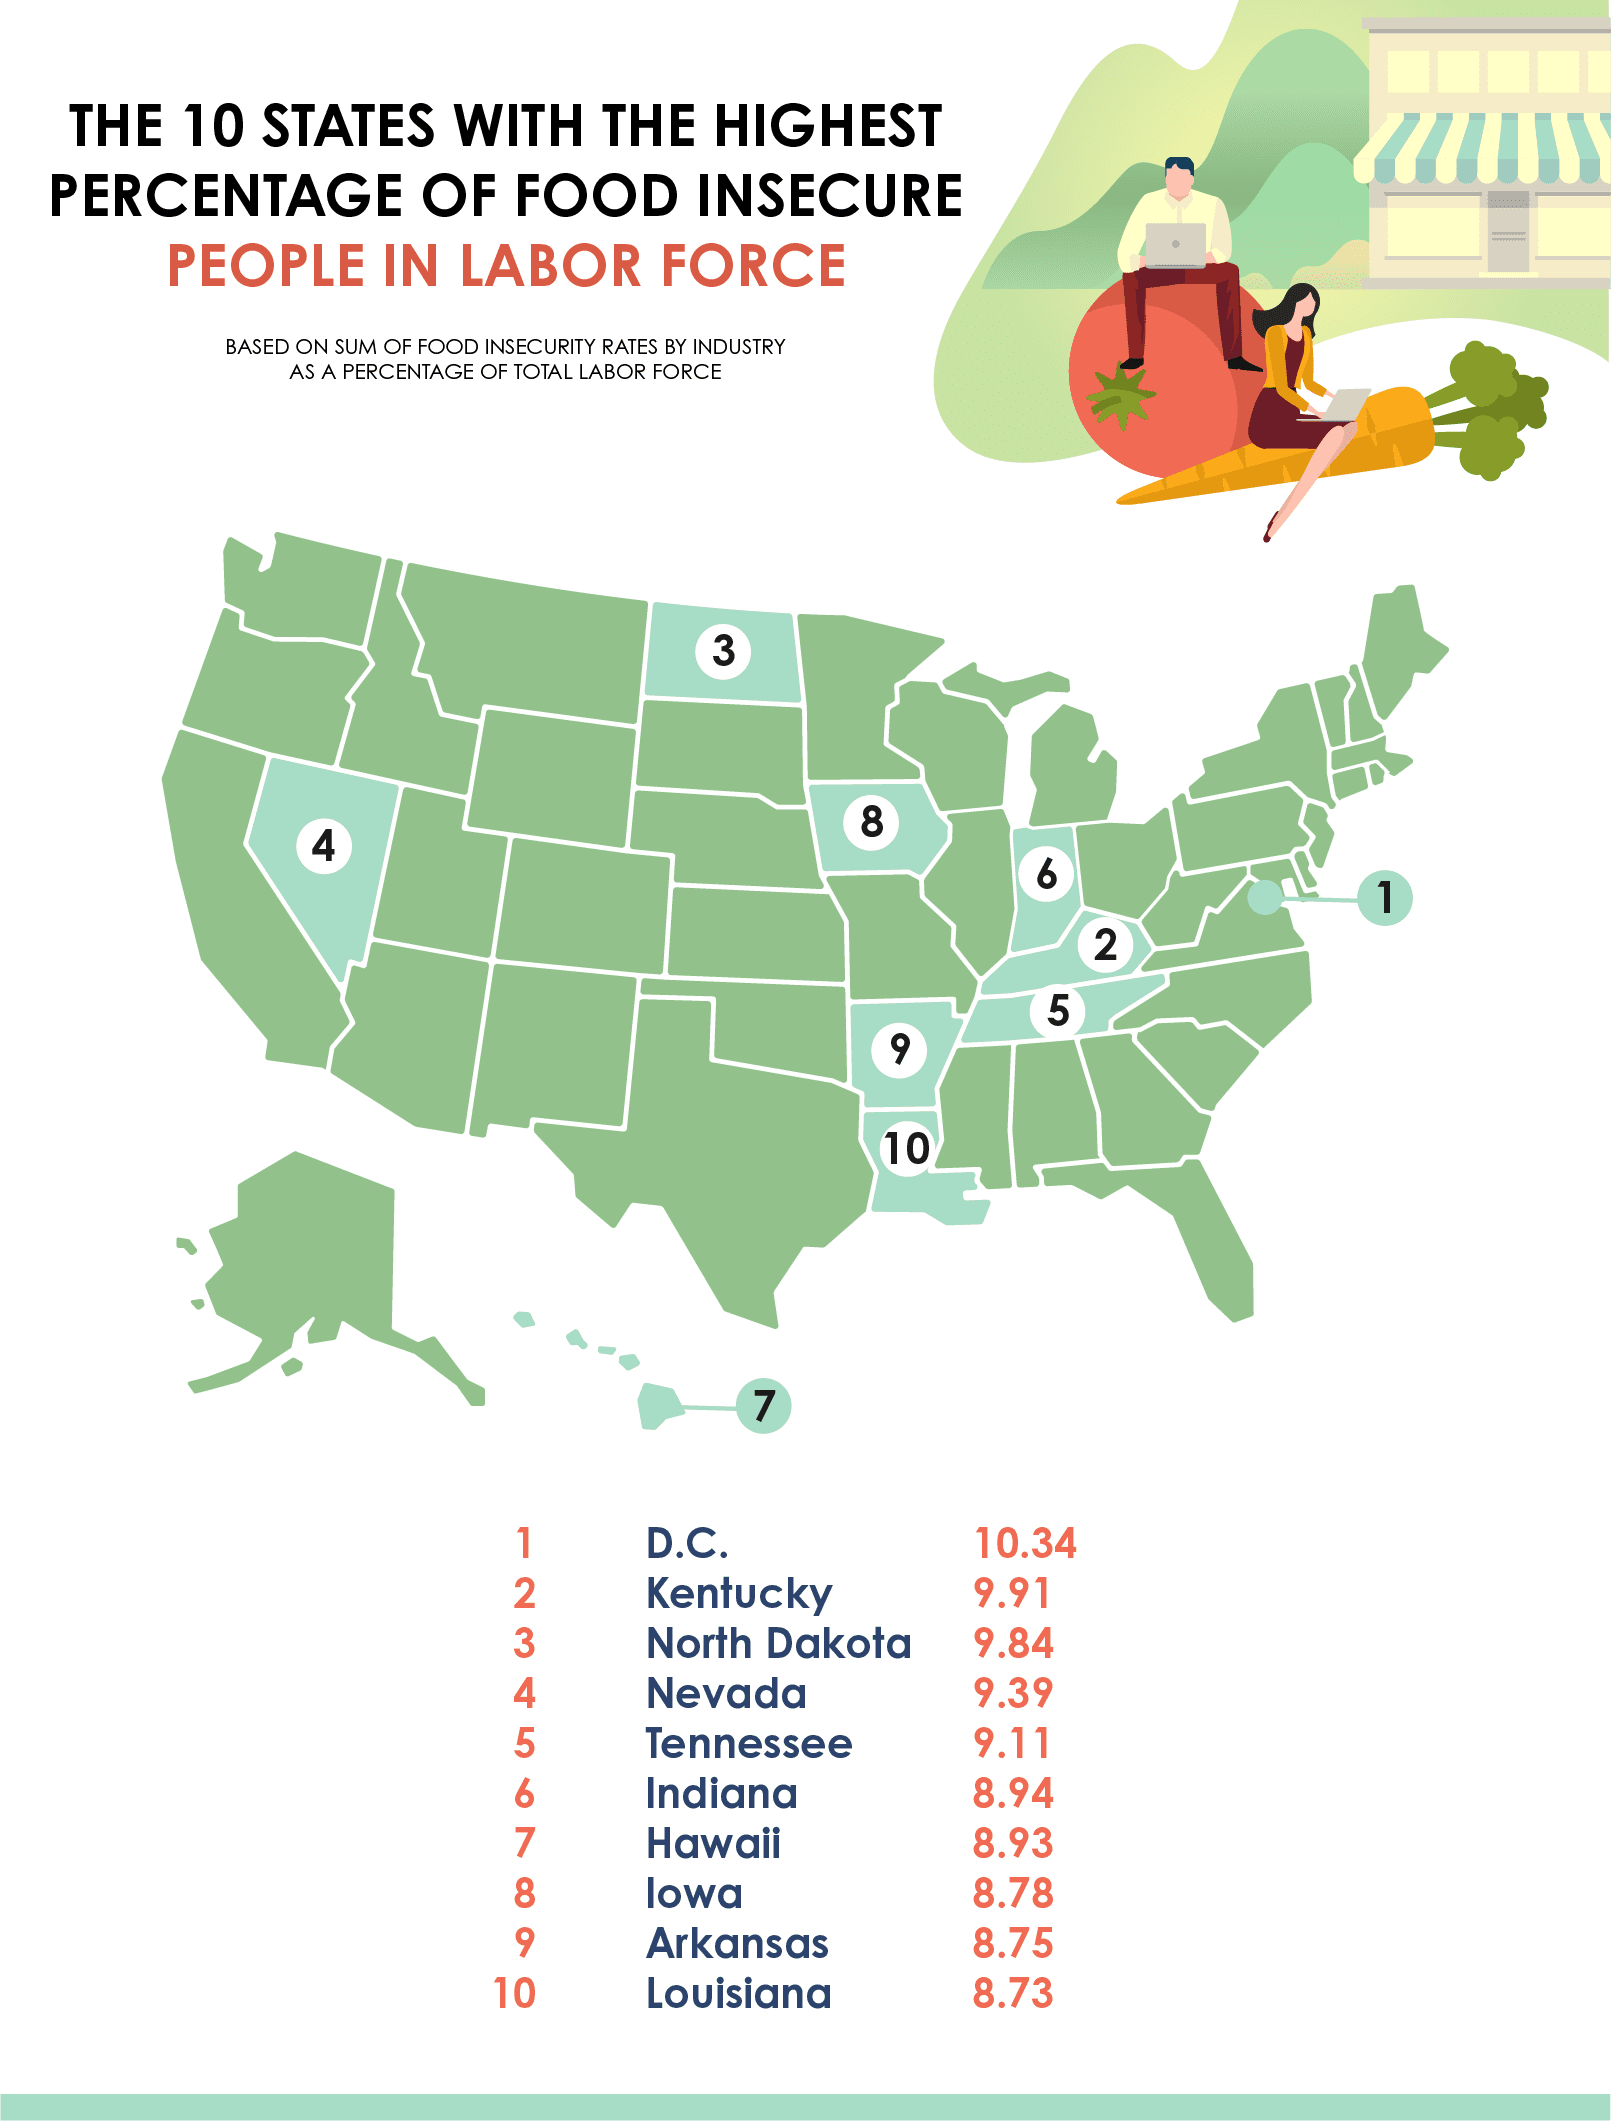 Map of the states with the most food insecure labor force members